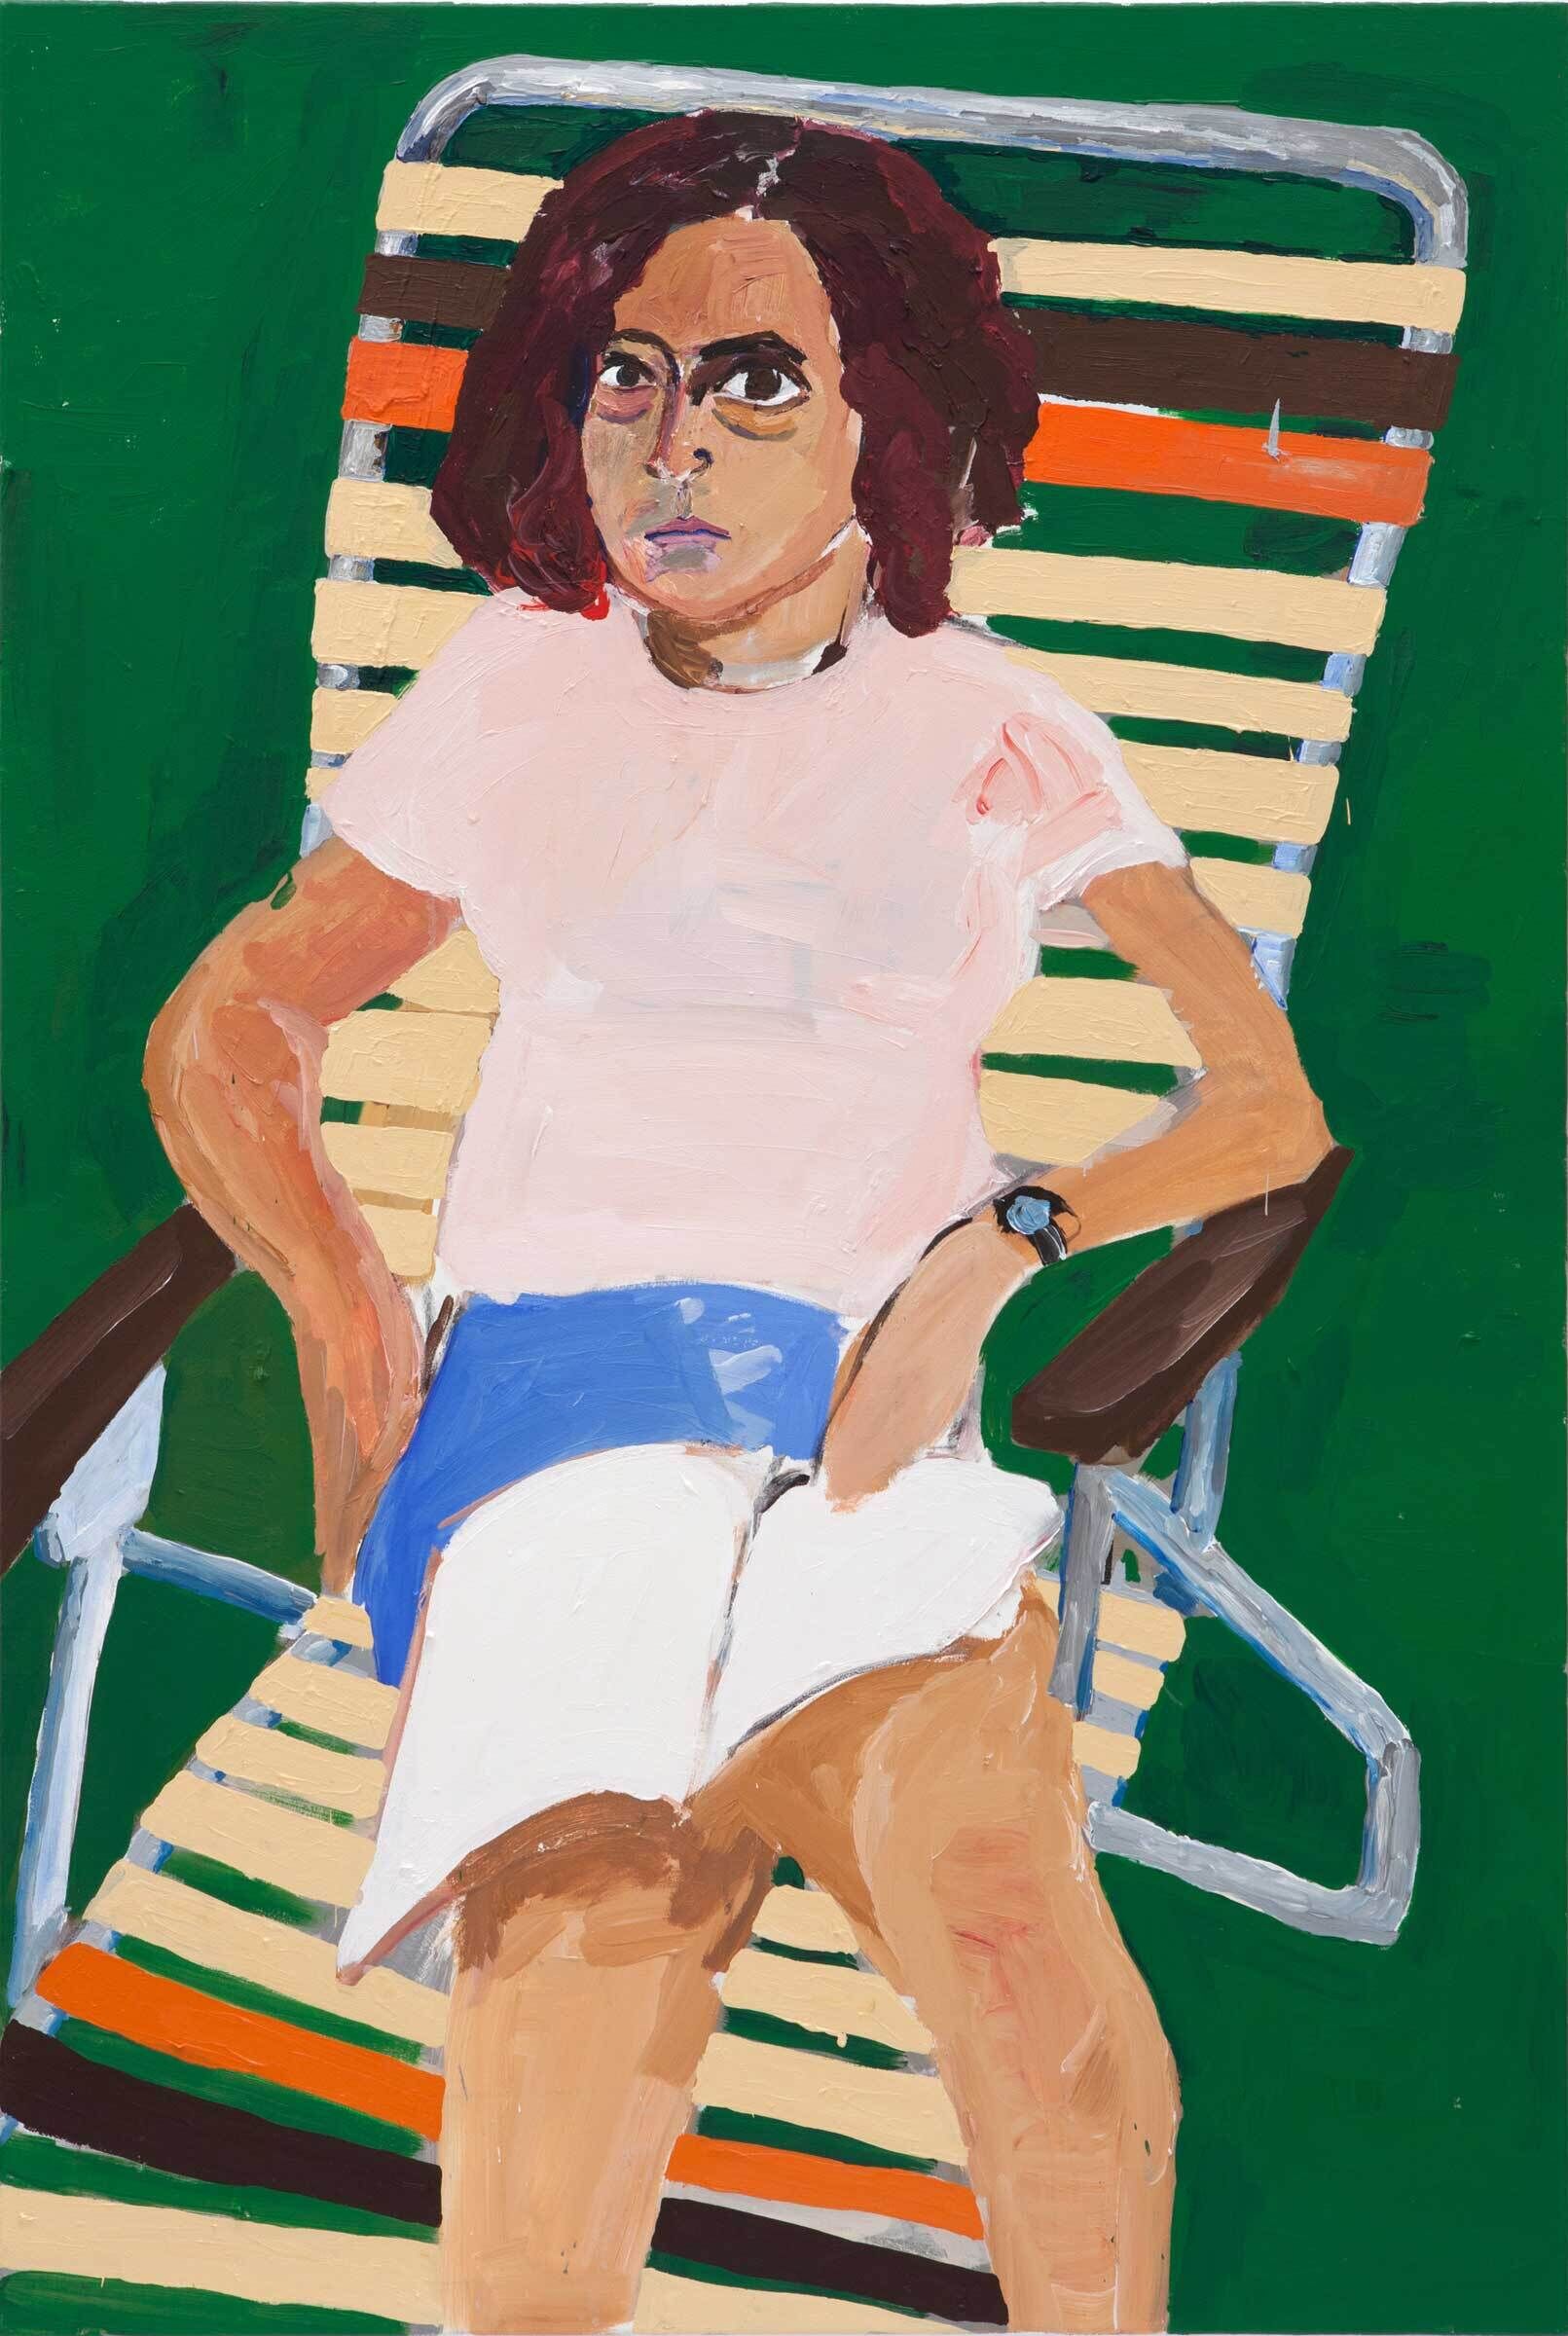 A woman with short, reddish-brown curly hair sits on a deck chair. She wears a light pink t-shirt and blue shorts, and an open book lays on her lap. The background is a grassy green.